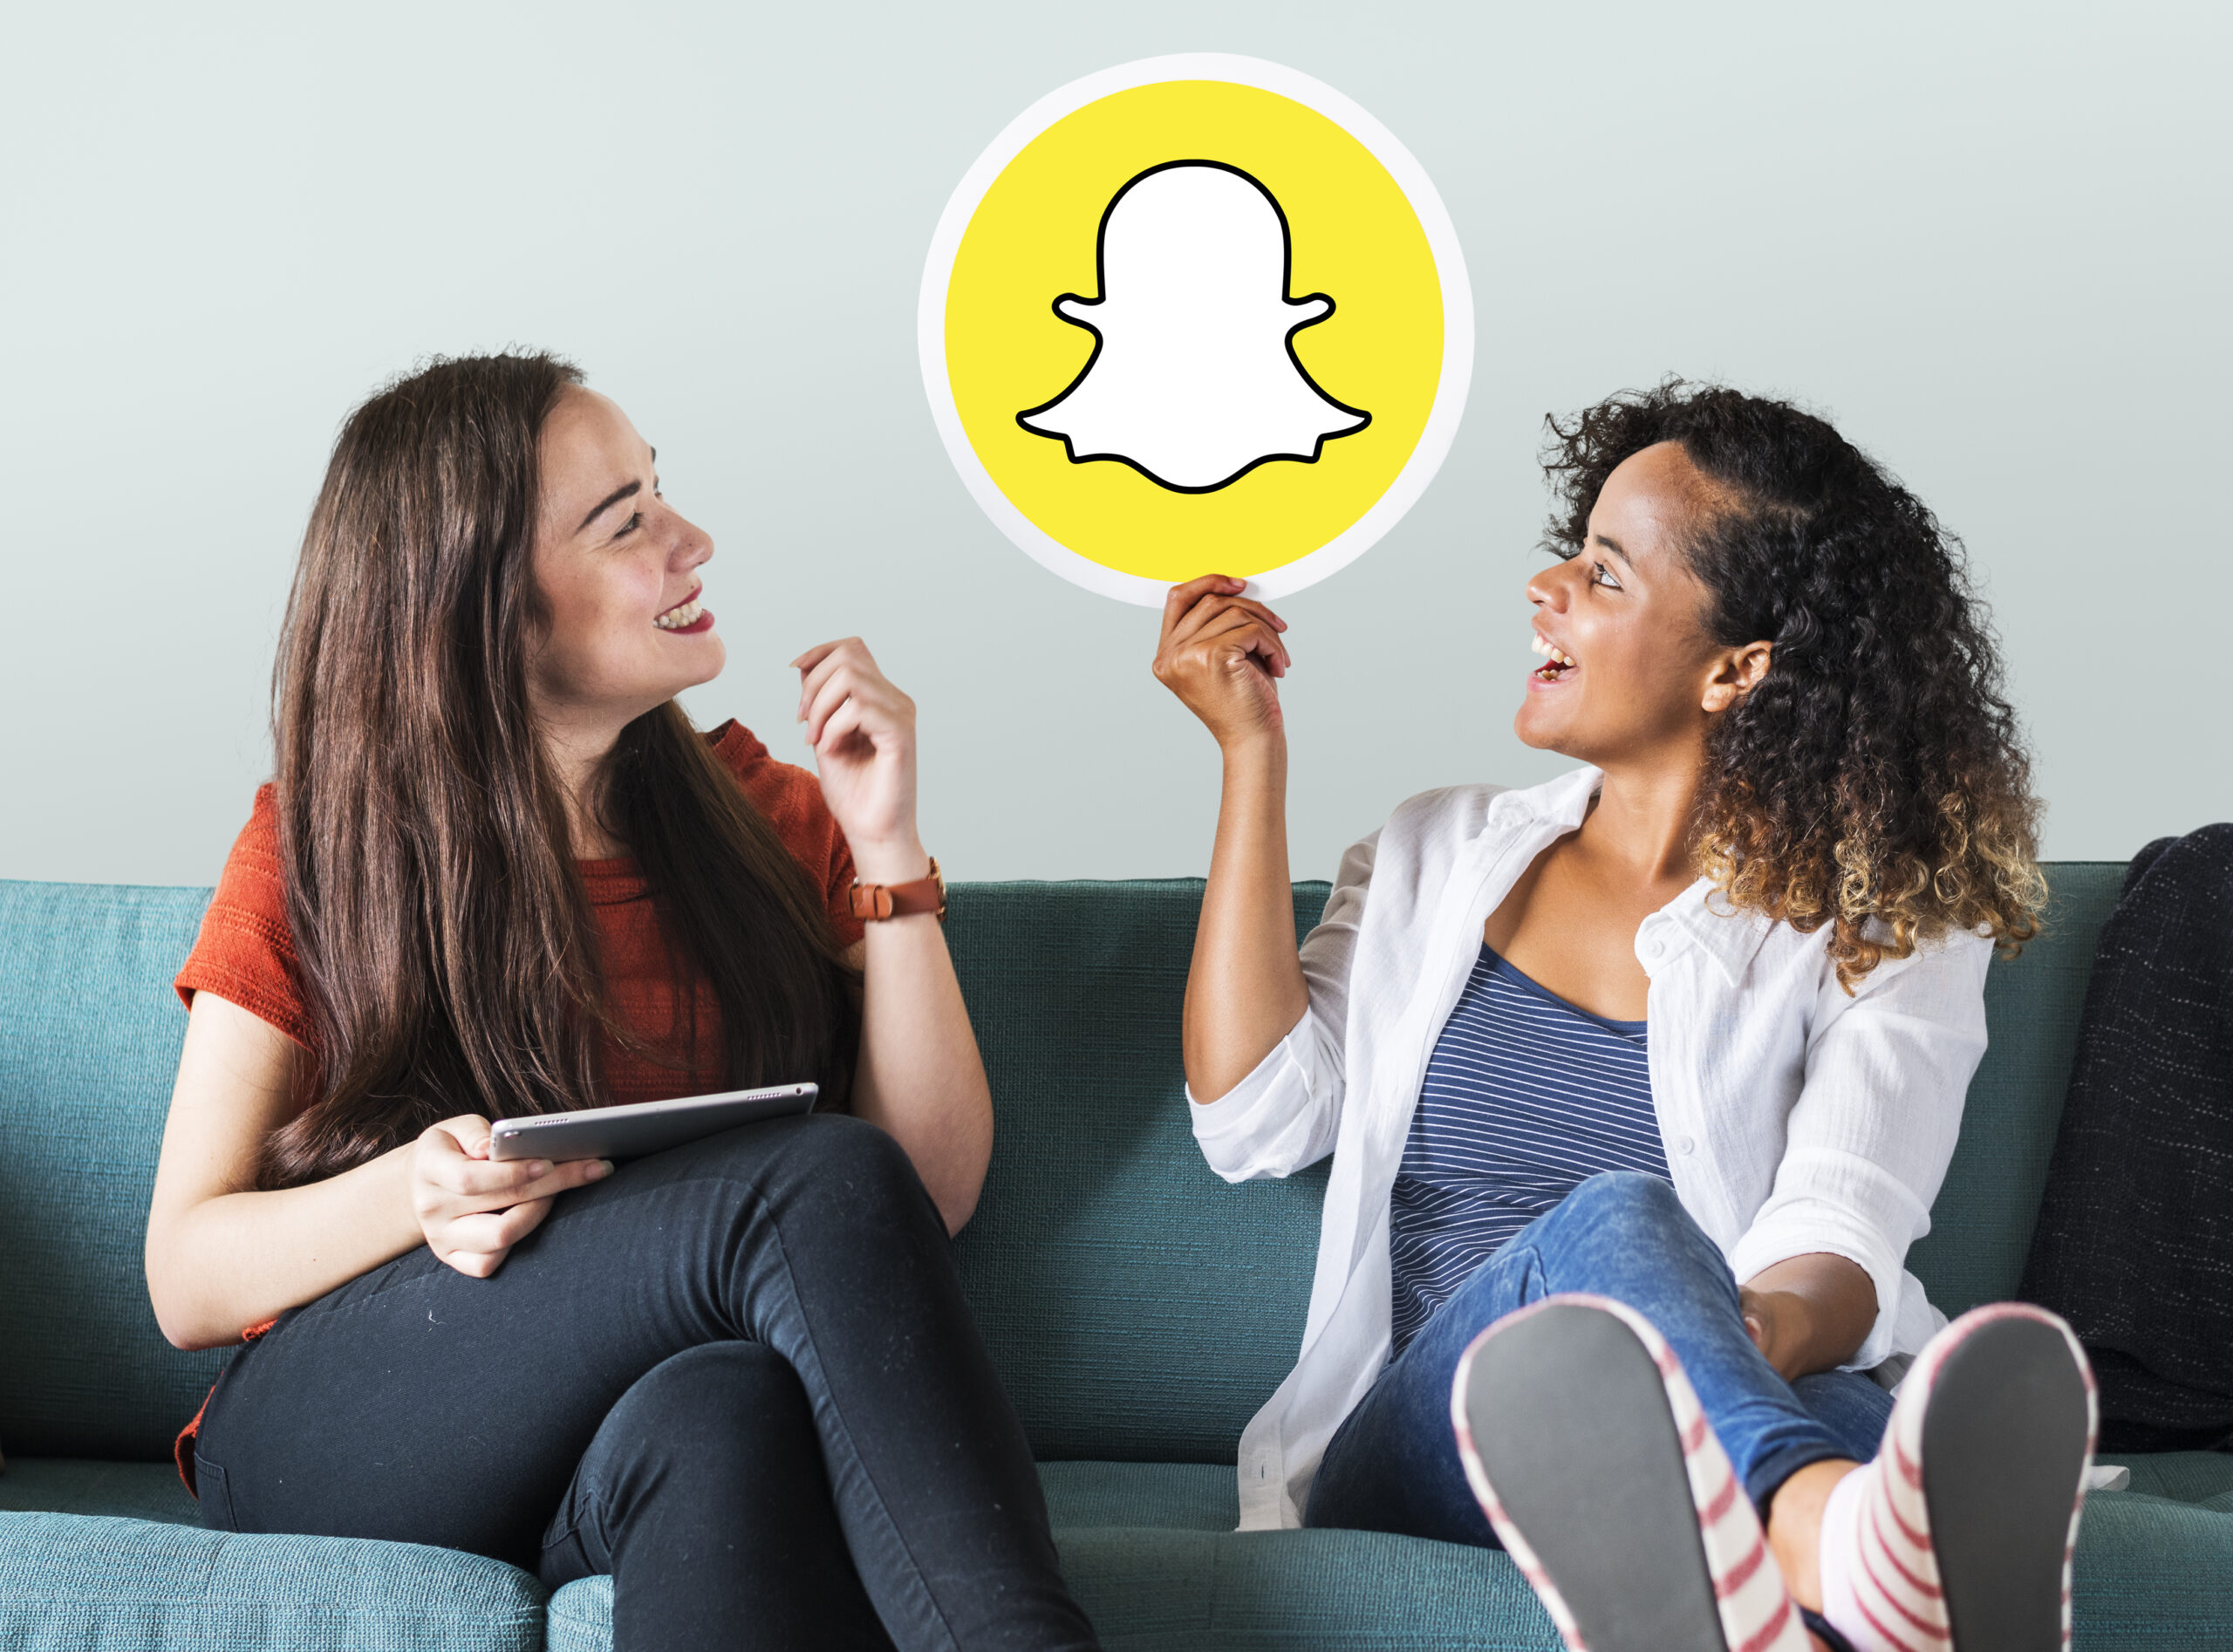 Budgetary Considerations for Creating an App in the Vein of Snapchat